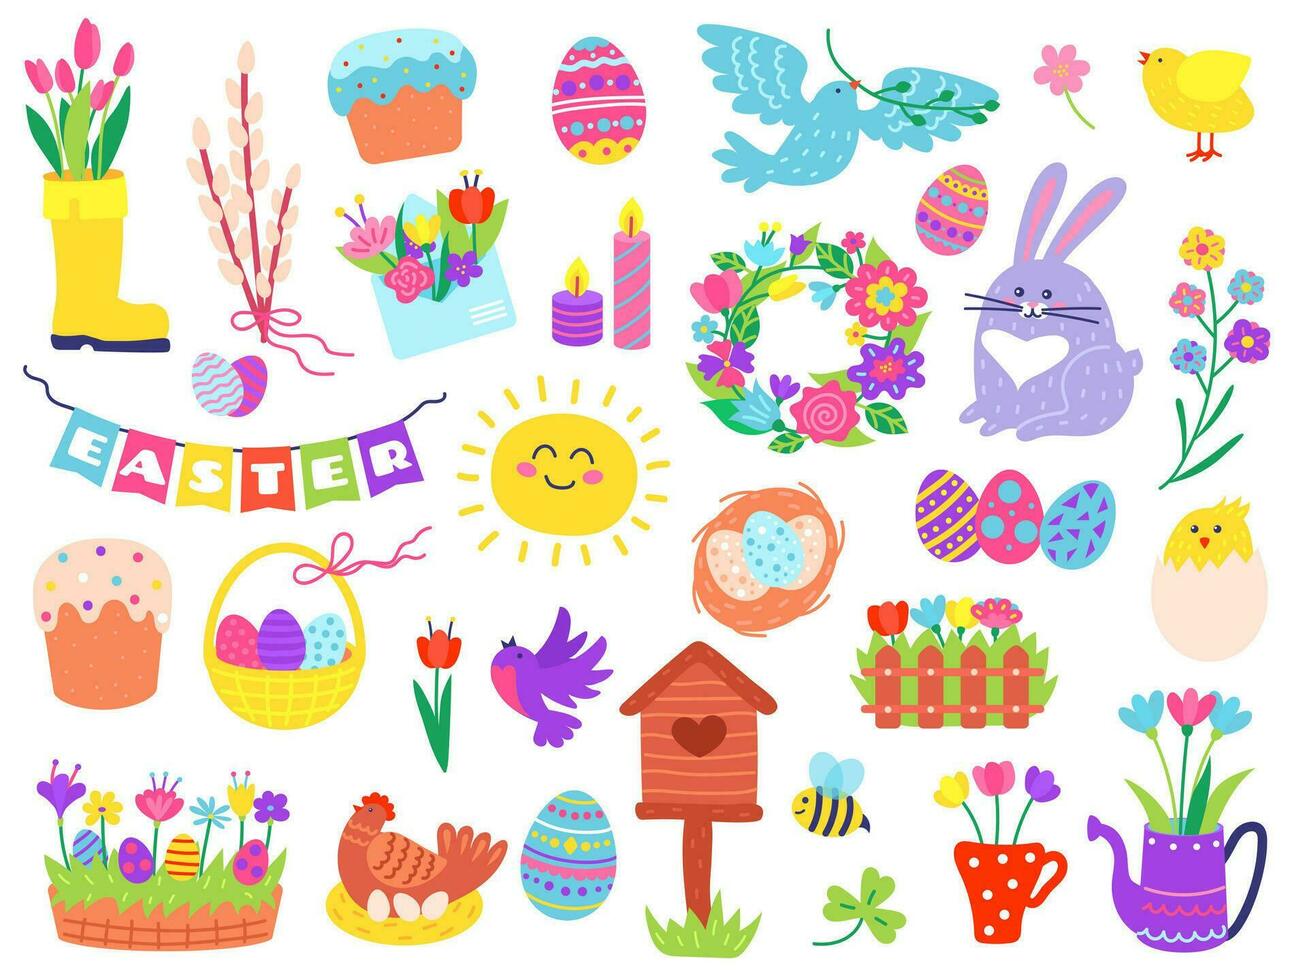 Cute easter elements, hand drawn spring season doodles. Painted eggs in basket, bunny, flowers, birds, springtime holiday doodle vector set